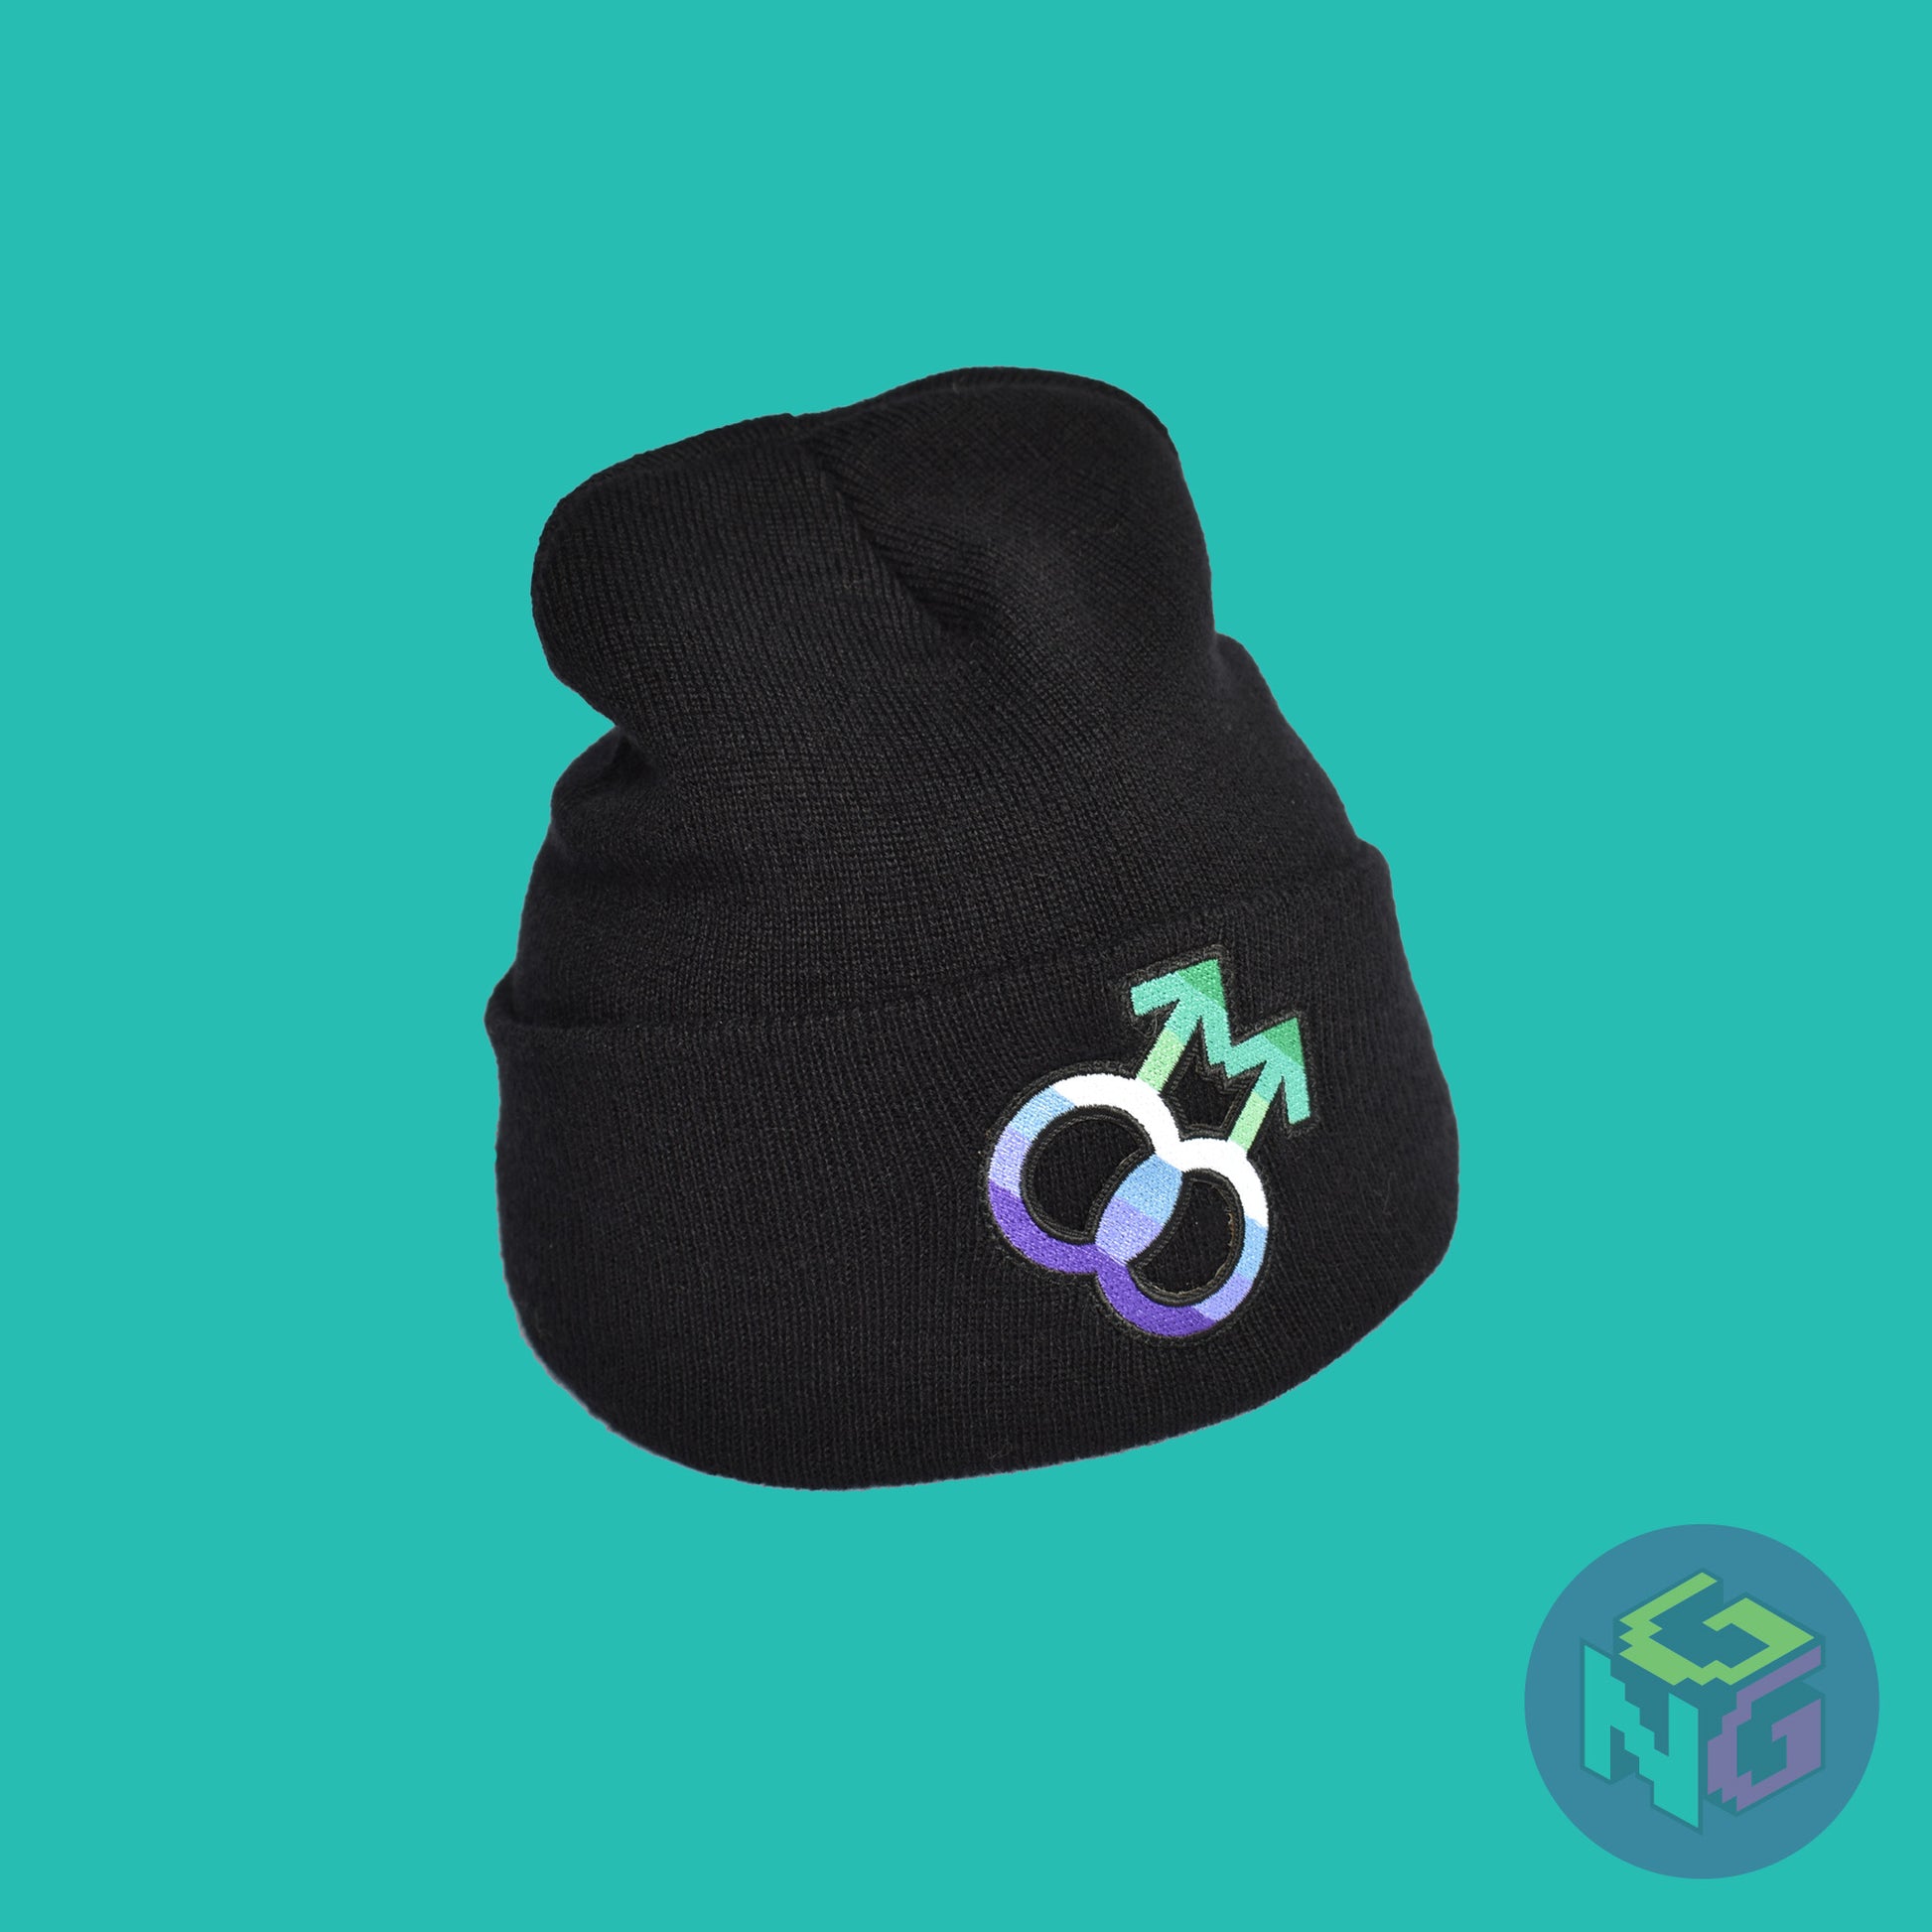 Black knit fabric beanie with the gay symbol in greens, blues, and white on the front. It is stretched and sitting upright in a right front view